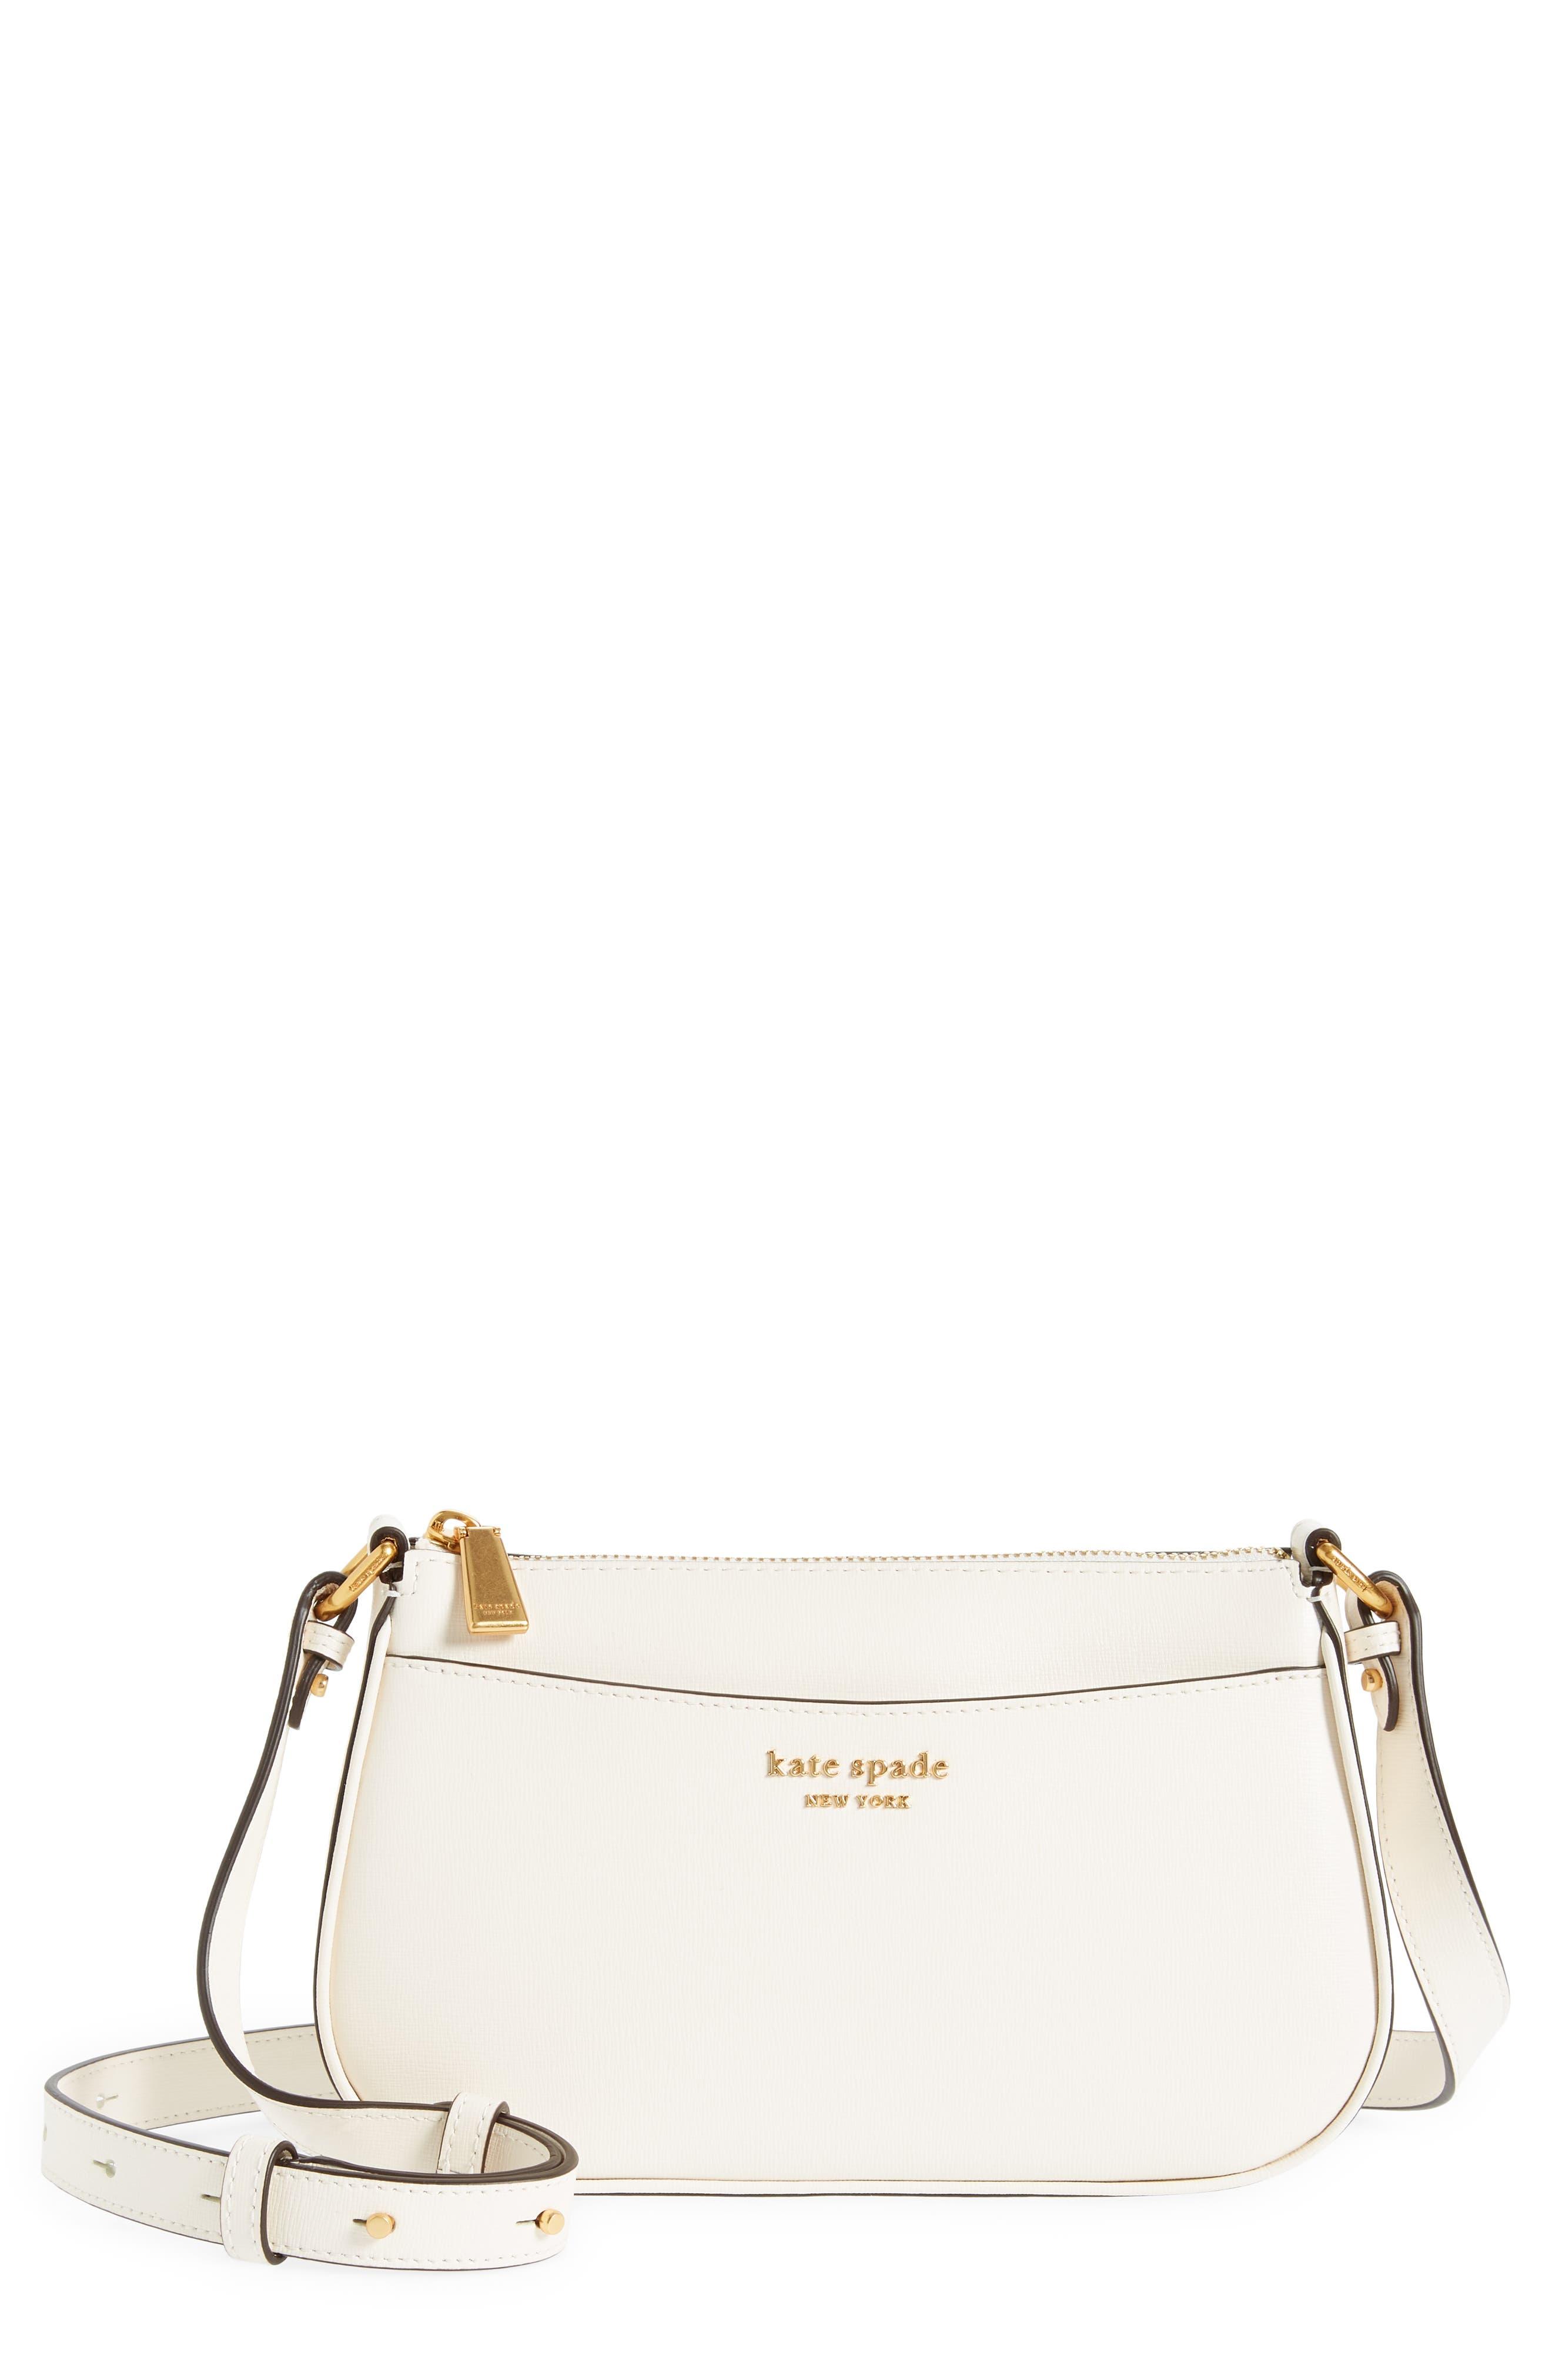 Kate Spade Small Bleecker Saffiano Leather Crossbody Bag in Natural